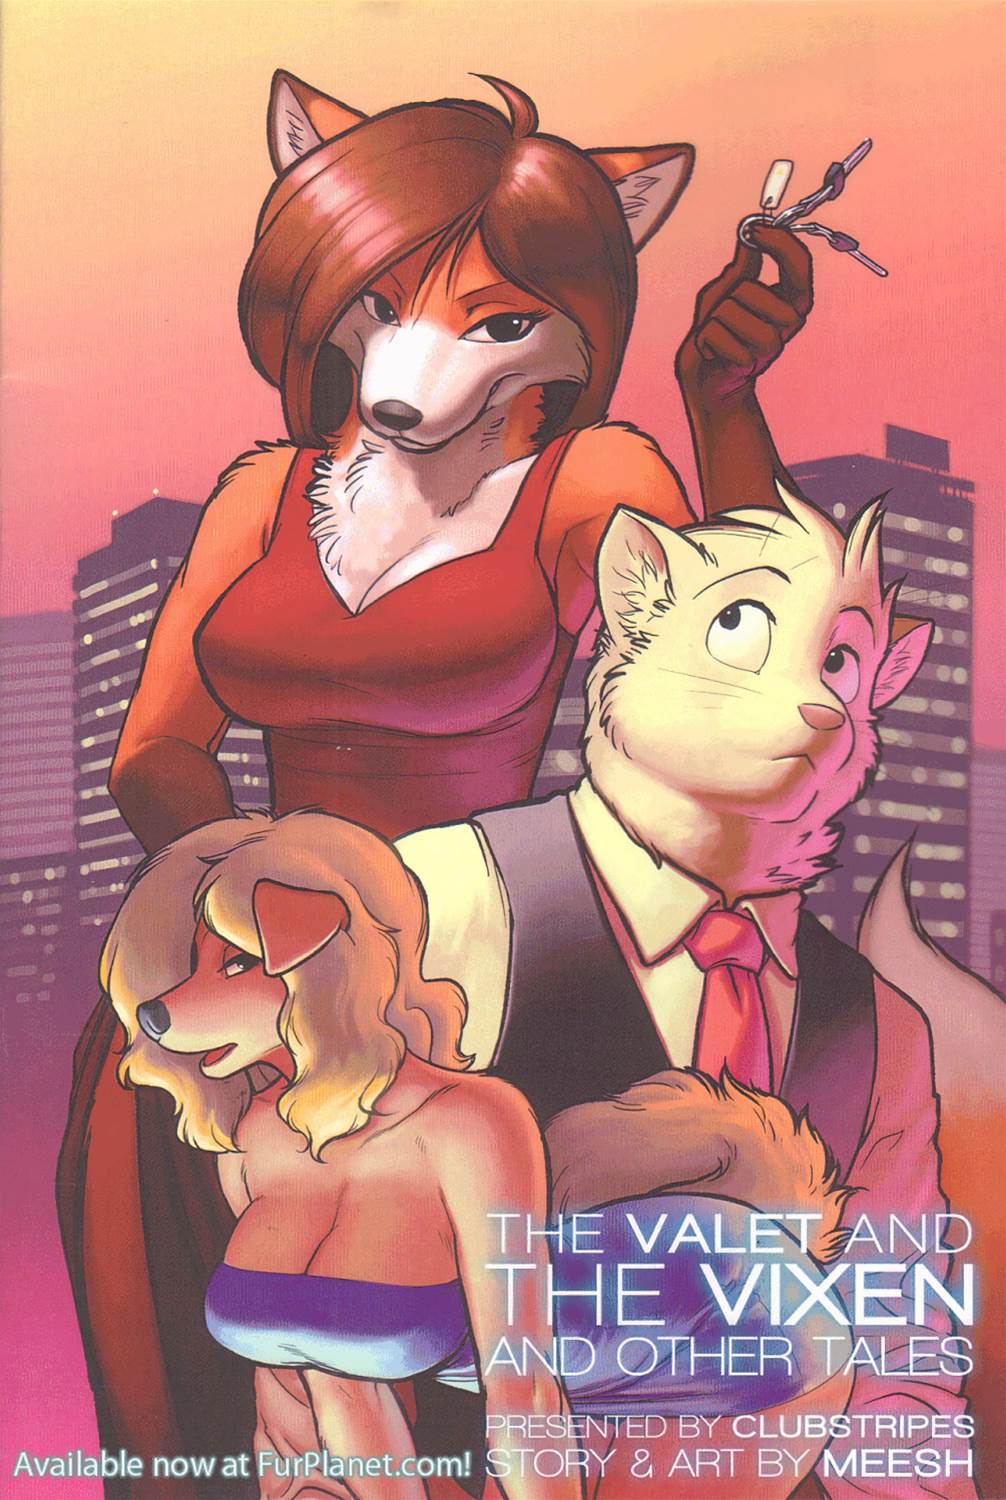 The valet and the vixen